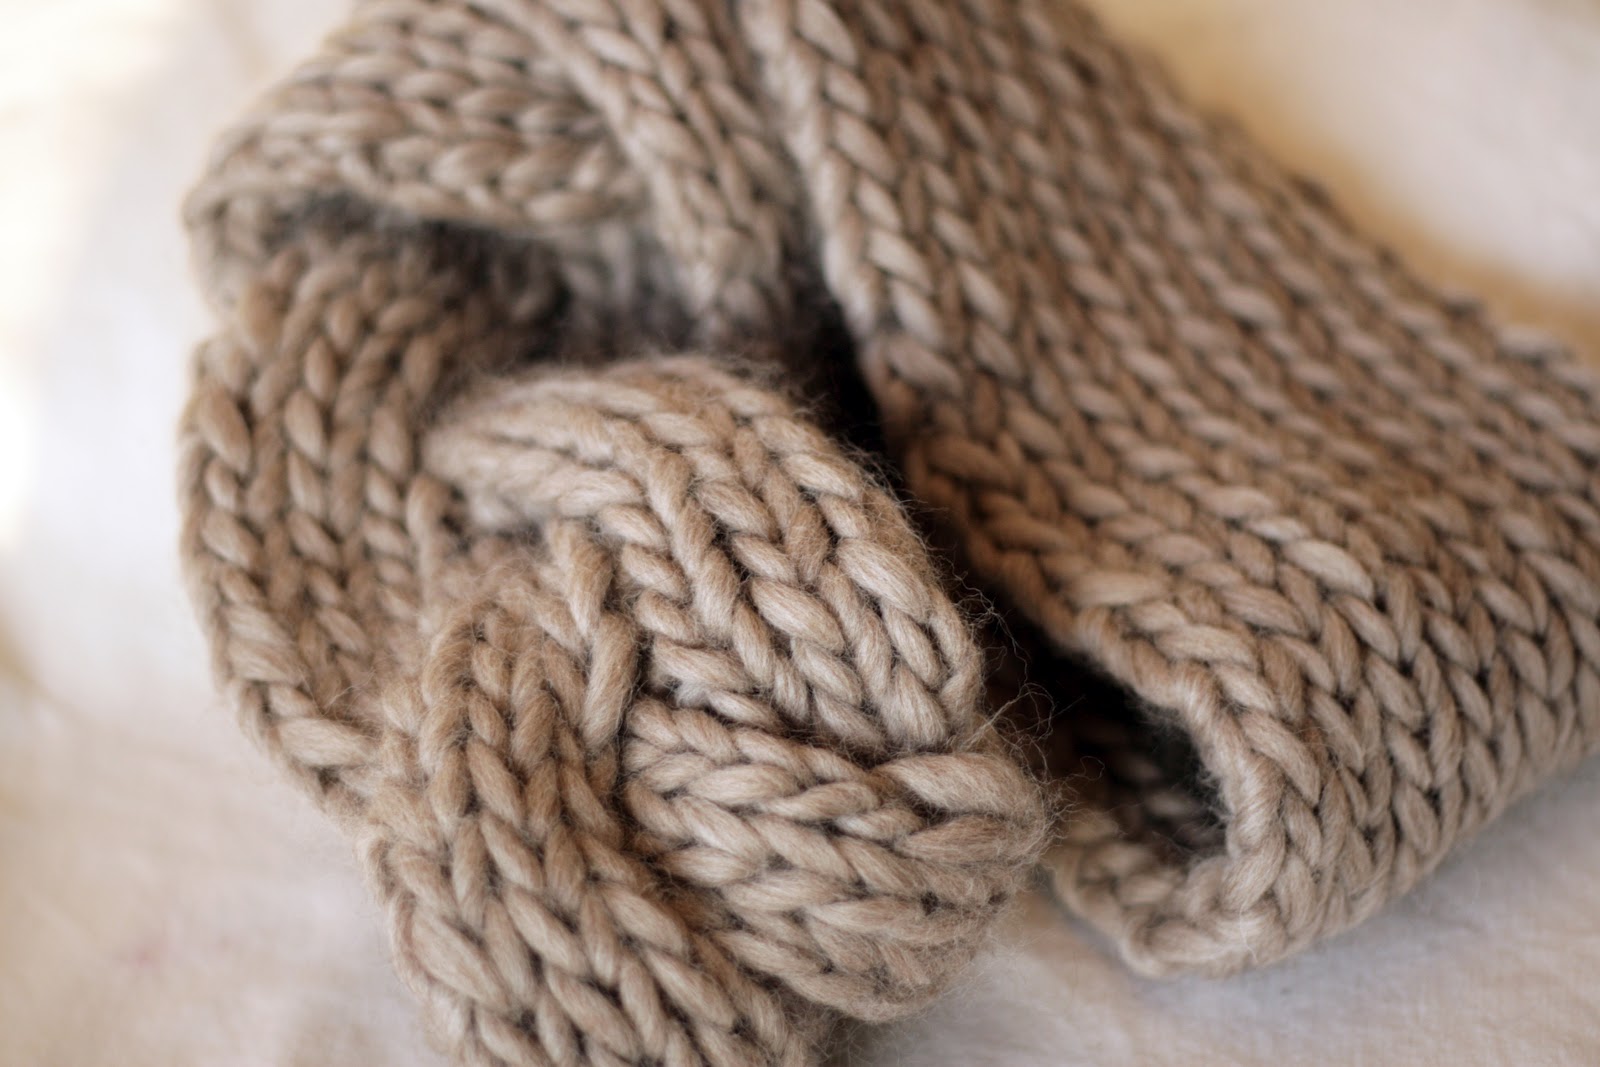 KATE PRESTON HANDKNITS /BLOG: Kate's Braided Cable Cowl